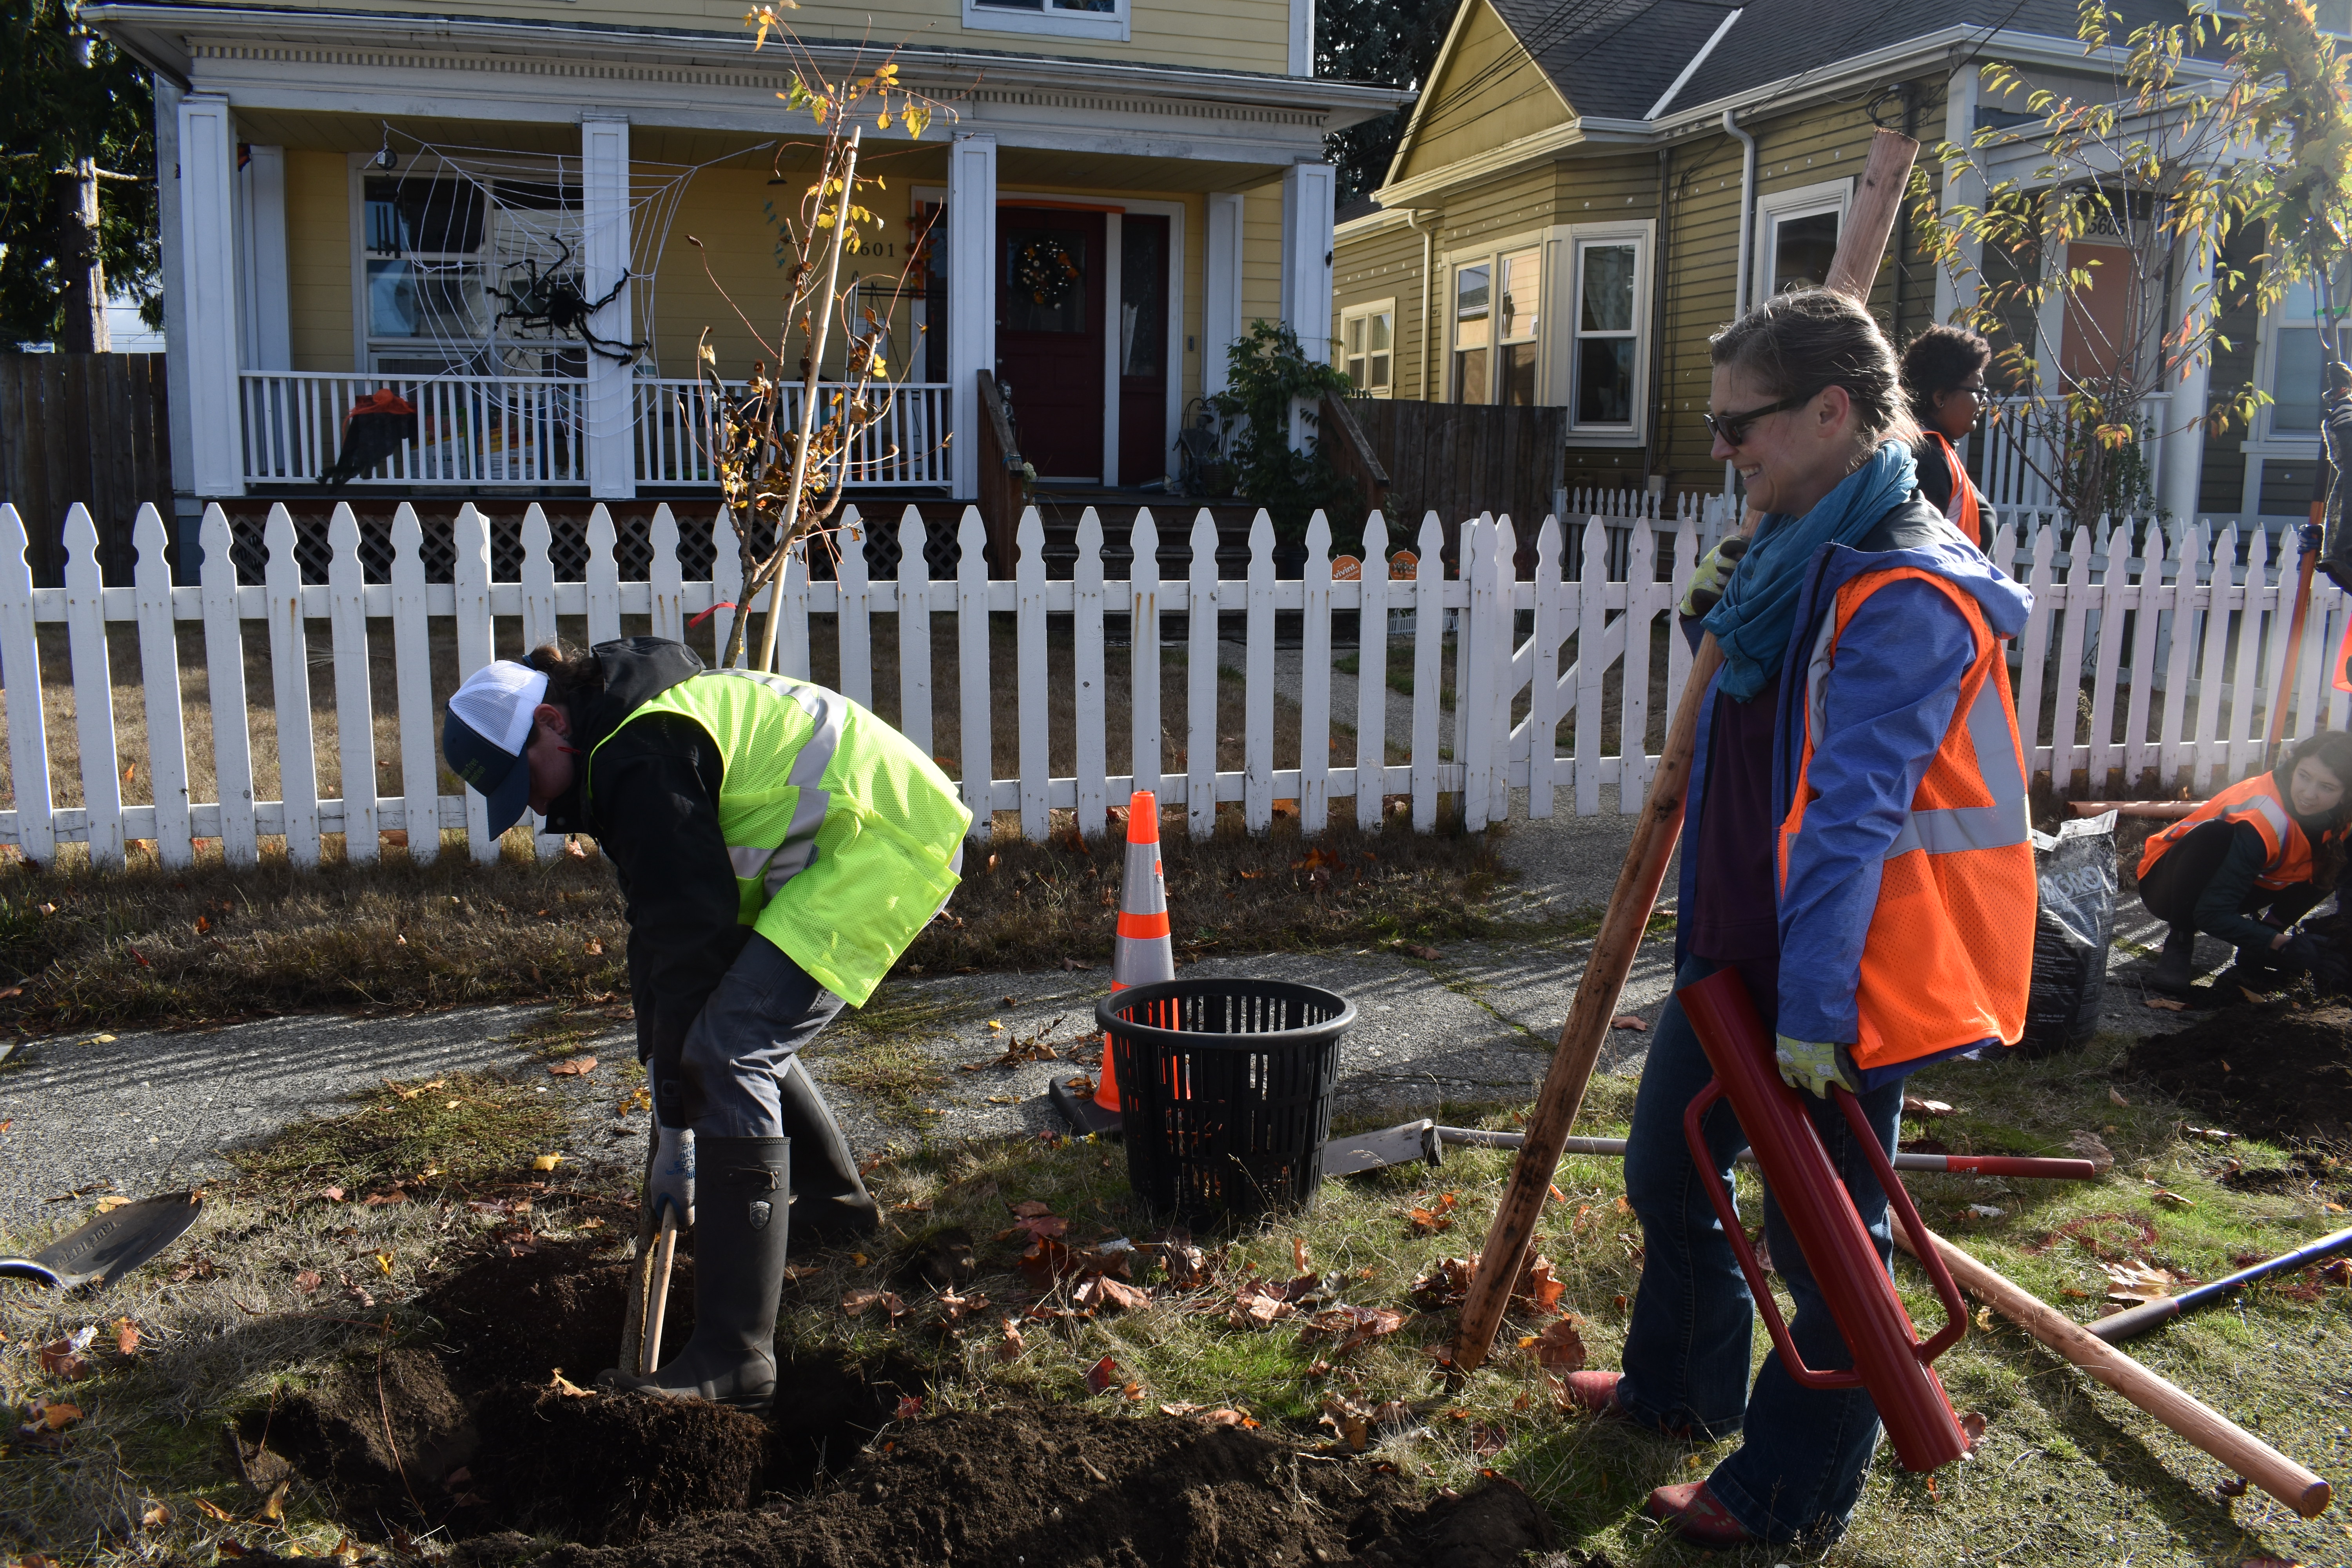 Courtney Johnson with the Tacoma Tree Foundation, left, begins to plant a tree in a right-of-way in South Tacoma, with the help of volunteer Lana Hanford, right.